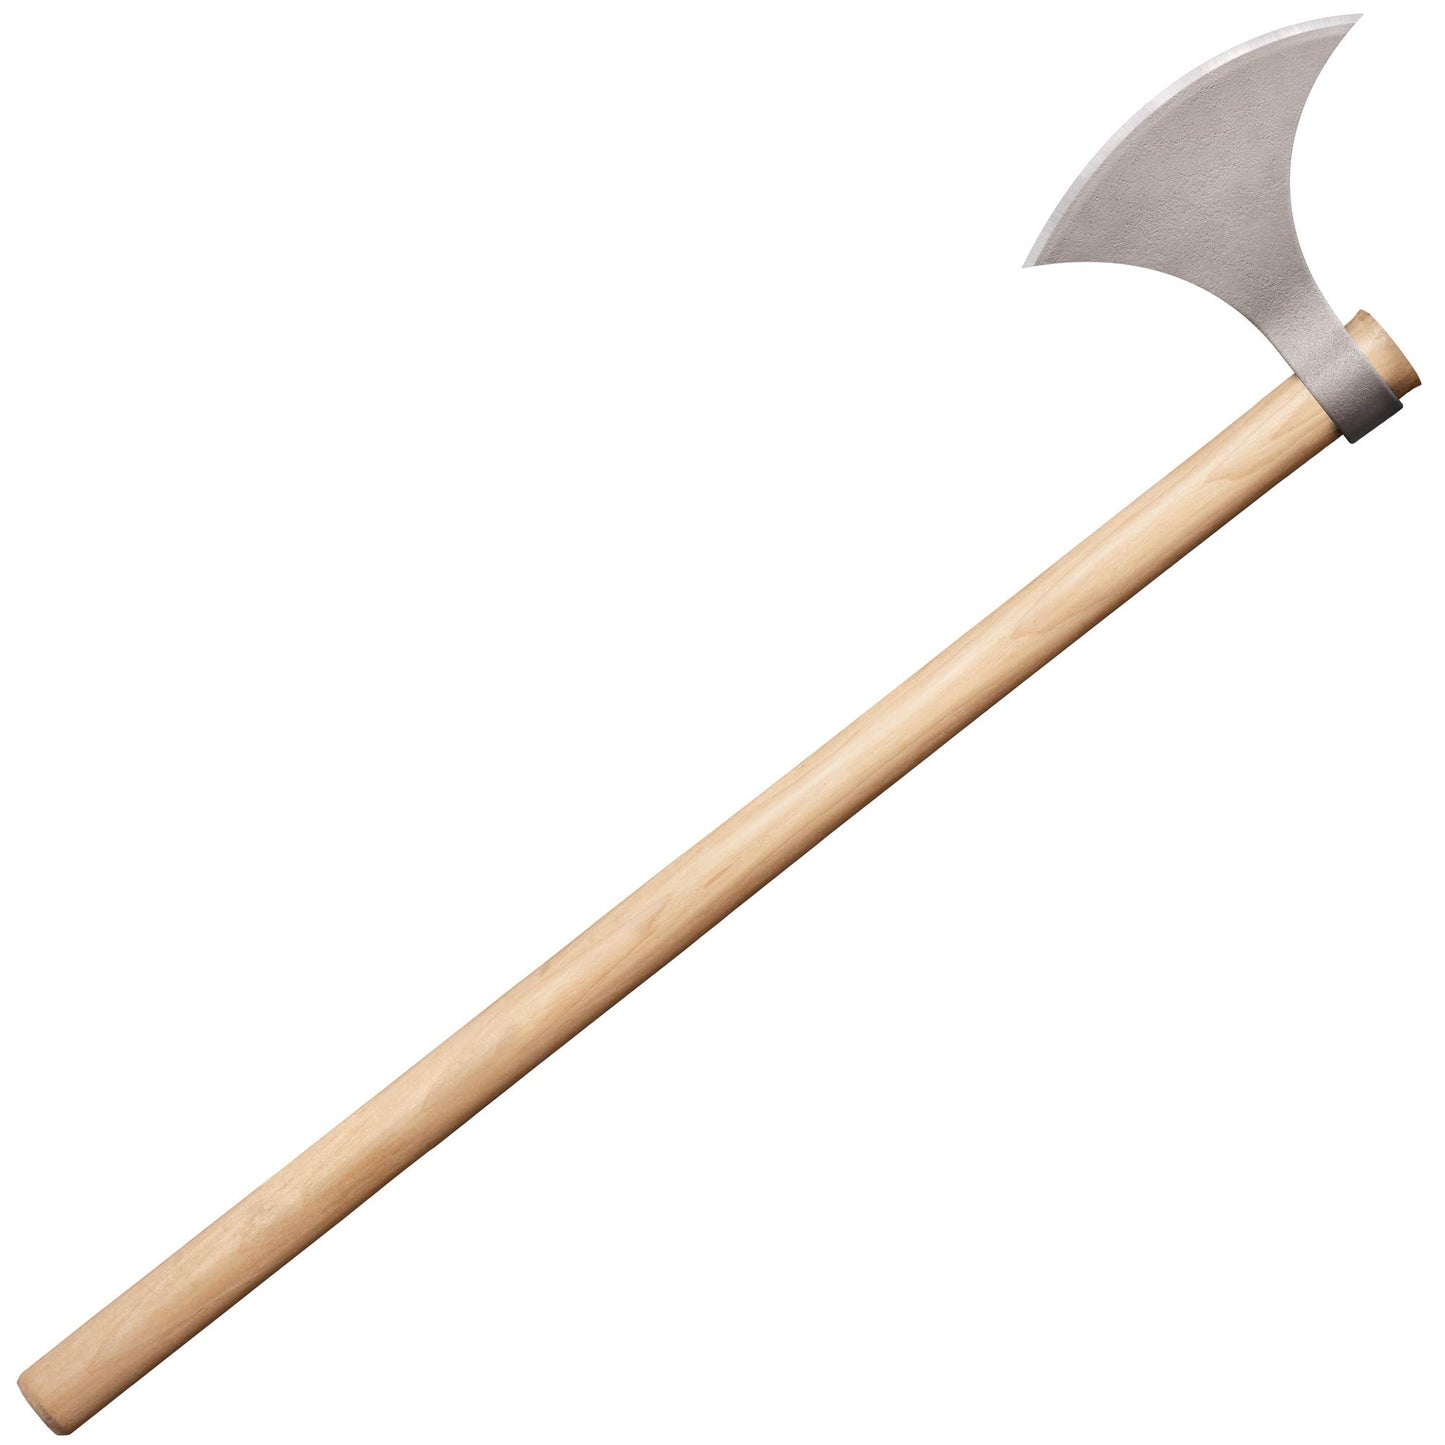 Cold Steel Viking Battle Axe, Overall: 30"